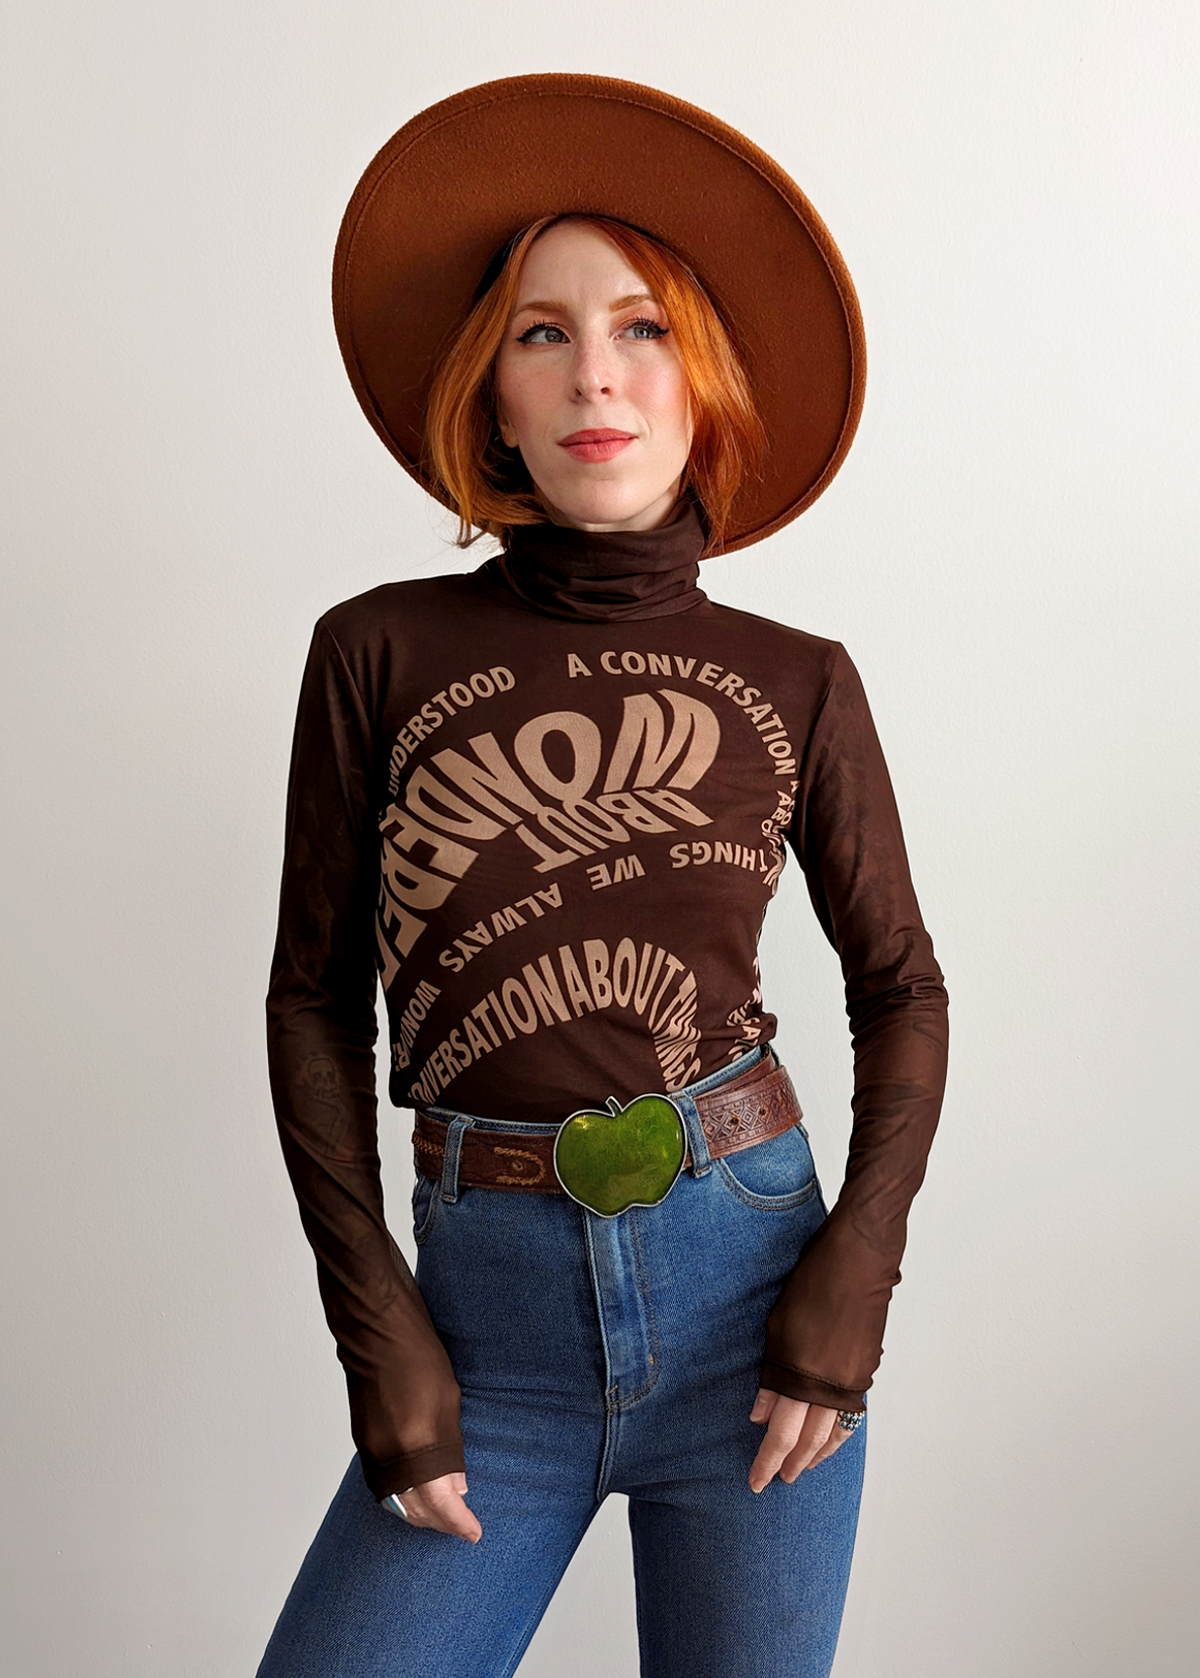 70s 90s inspired slinky stretch brown mesh turtleneck top with typeface graphics at front by Rationalle